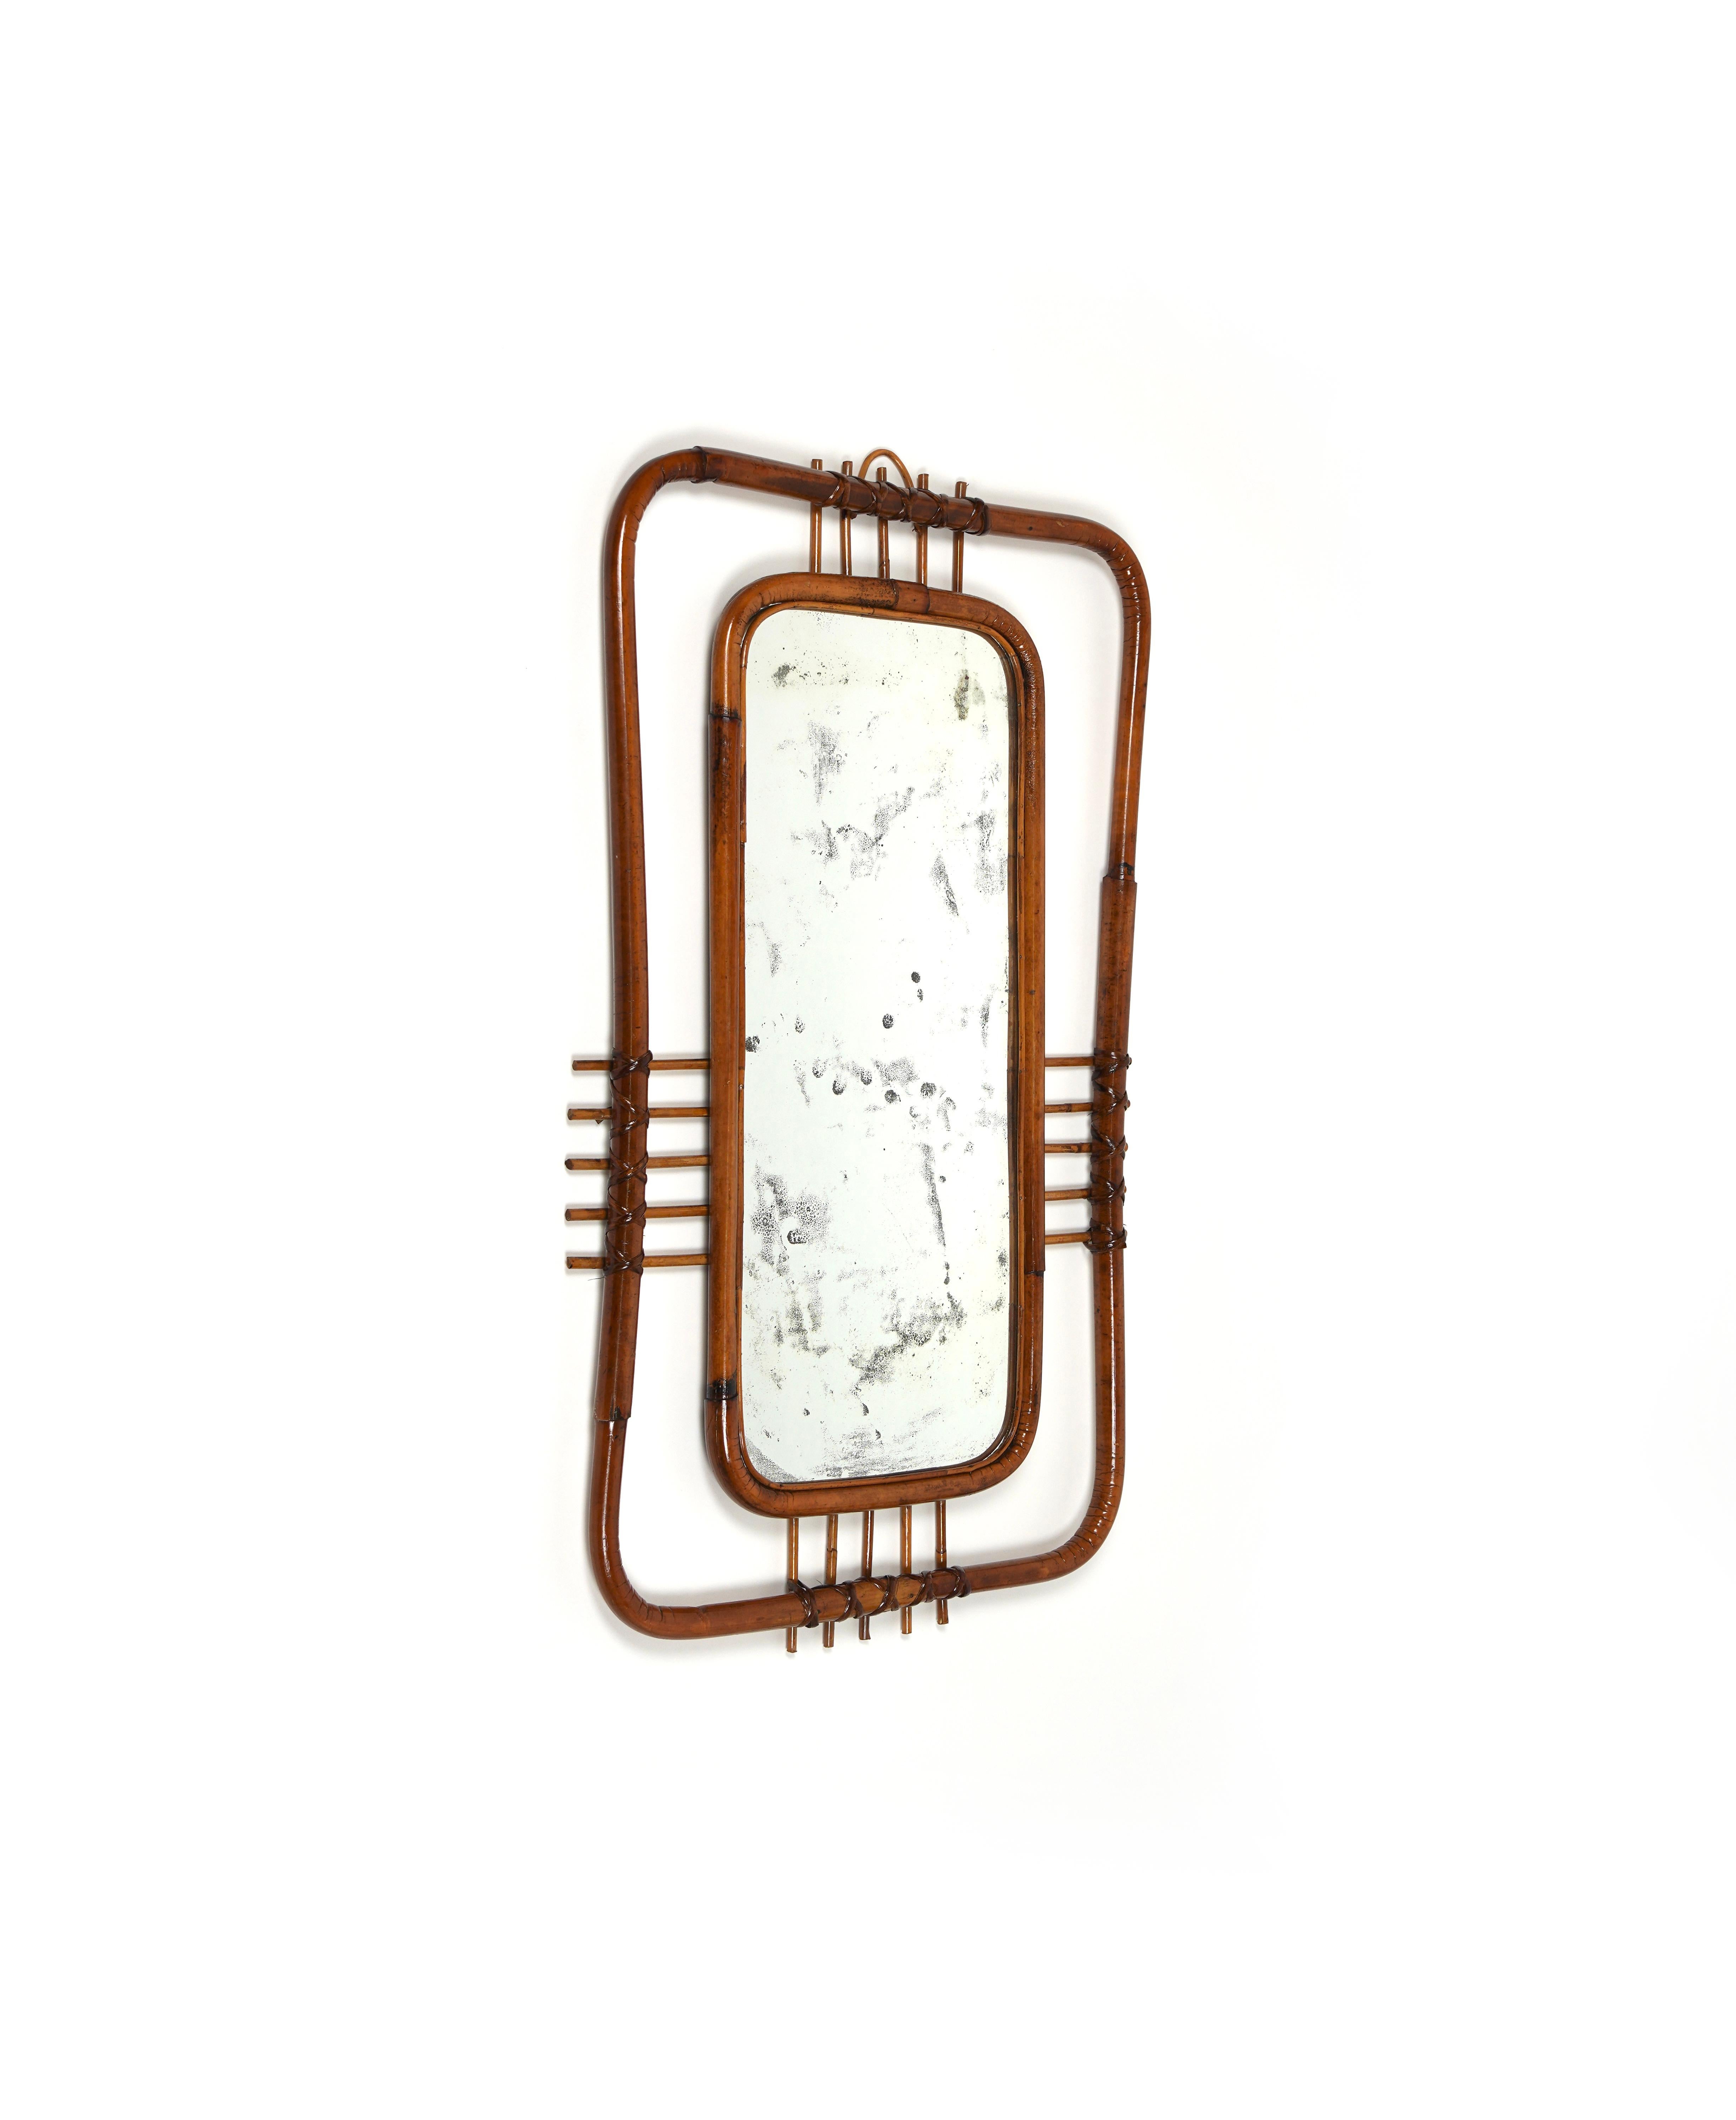 Mid-Century Modern Midcentury Bamboo and Rattan Geometric Wall Mirror, Italy, 1950s For Sale